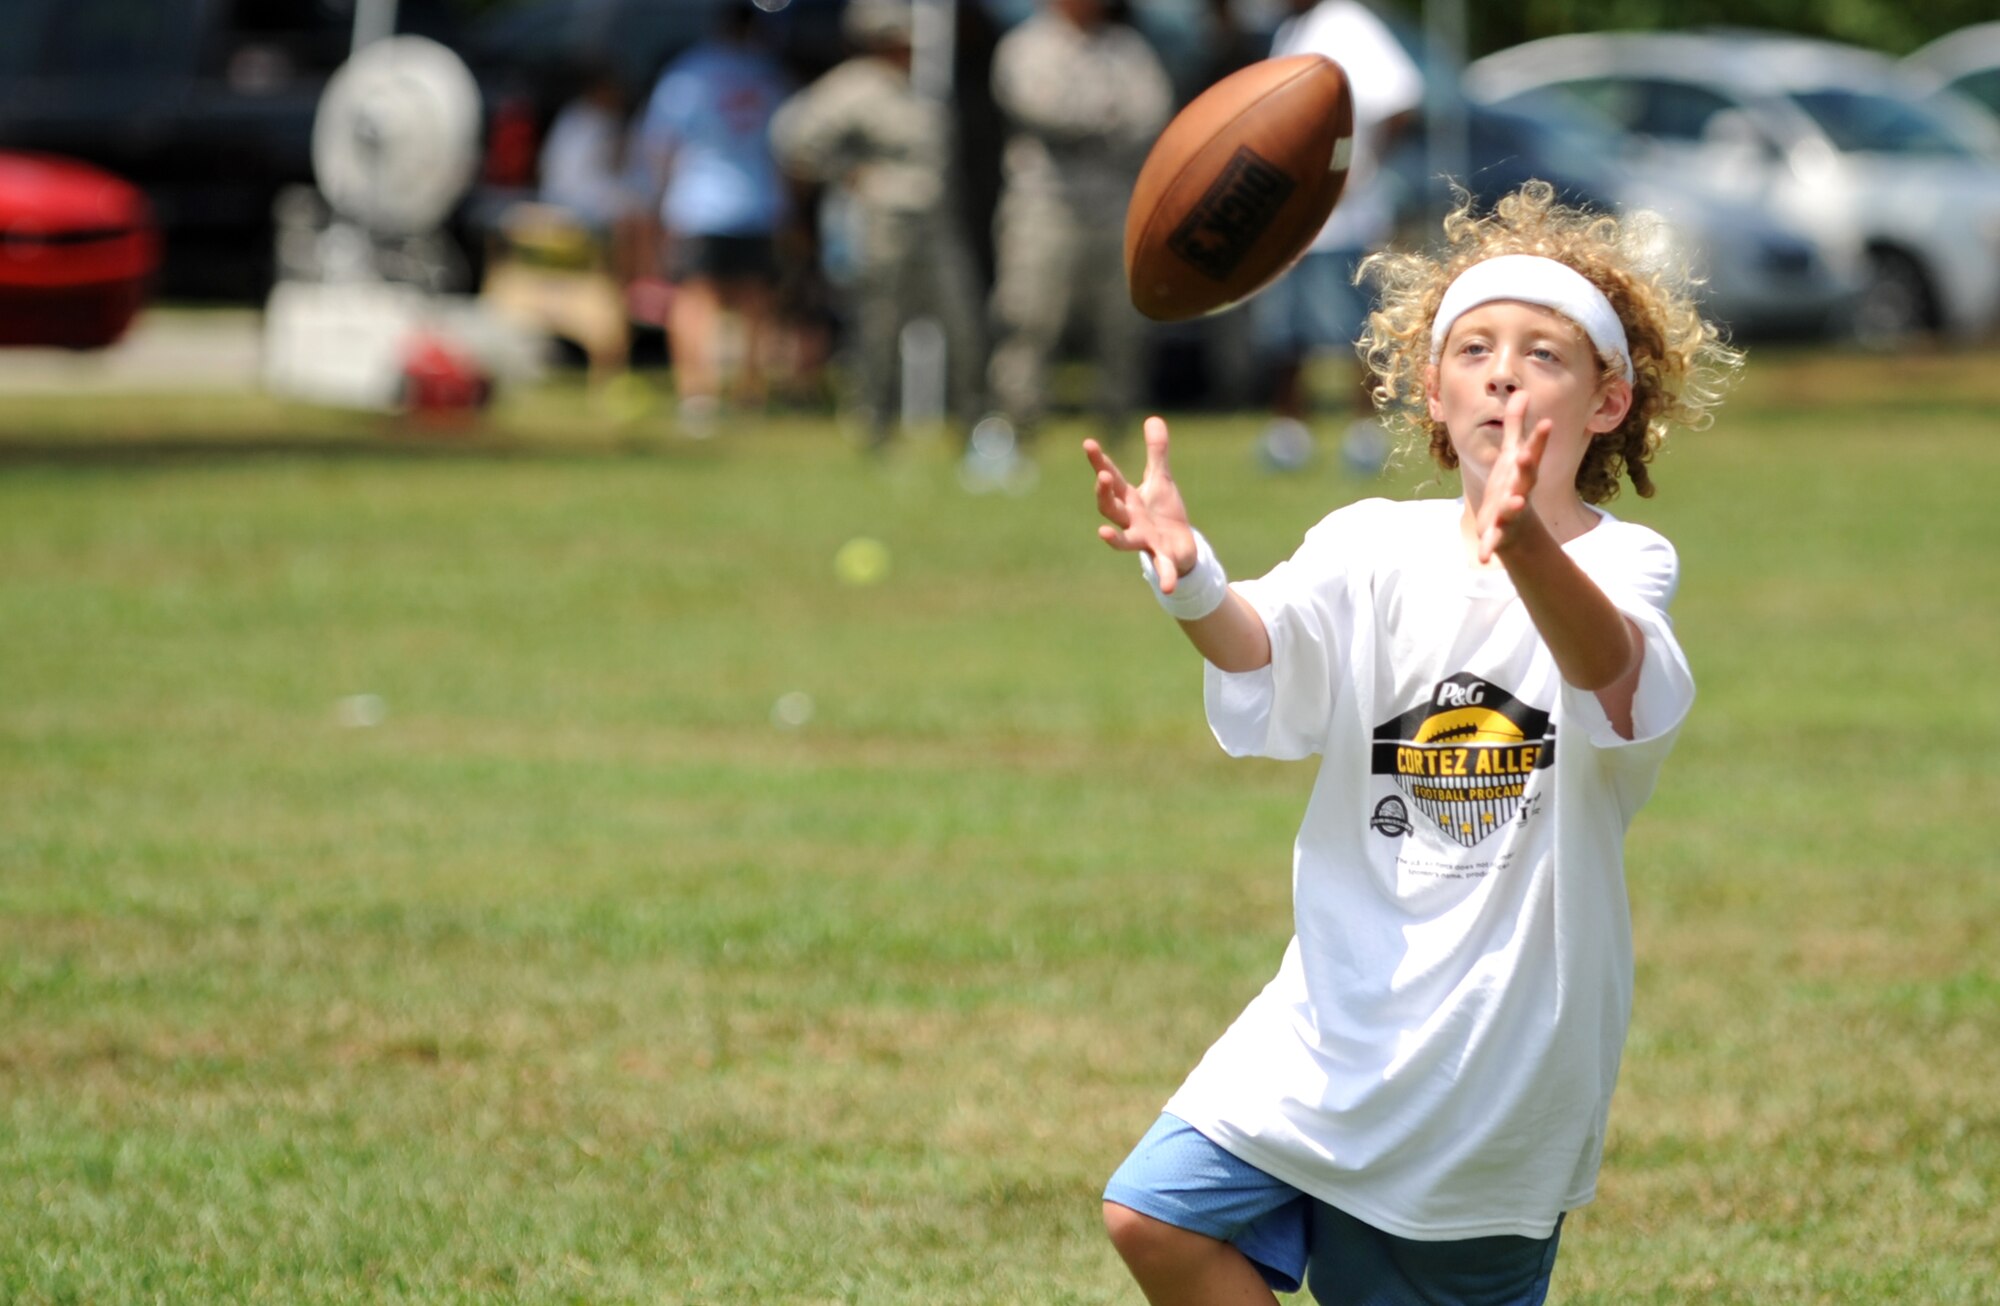 A young athlete lines up to snag a pass during a National Football League ProCamp, July 16, 2015, at Seymour Johnson Air Force Base, N.C. ProCamps are held all over the U.S. and internationally, to give children once-in-a-lifetime skill training with professional athletes. (U.S. Air Force photo/Senior Airman Ashley J. Thum)